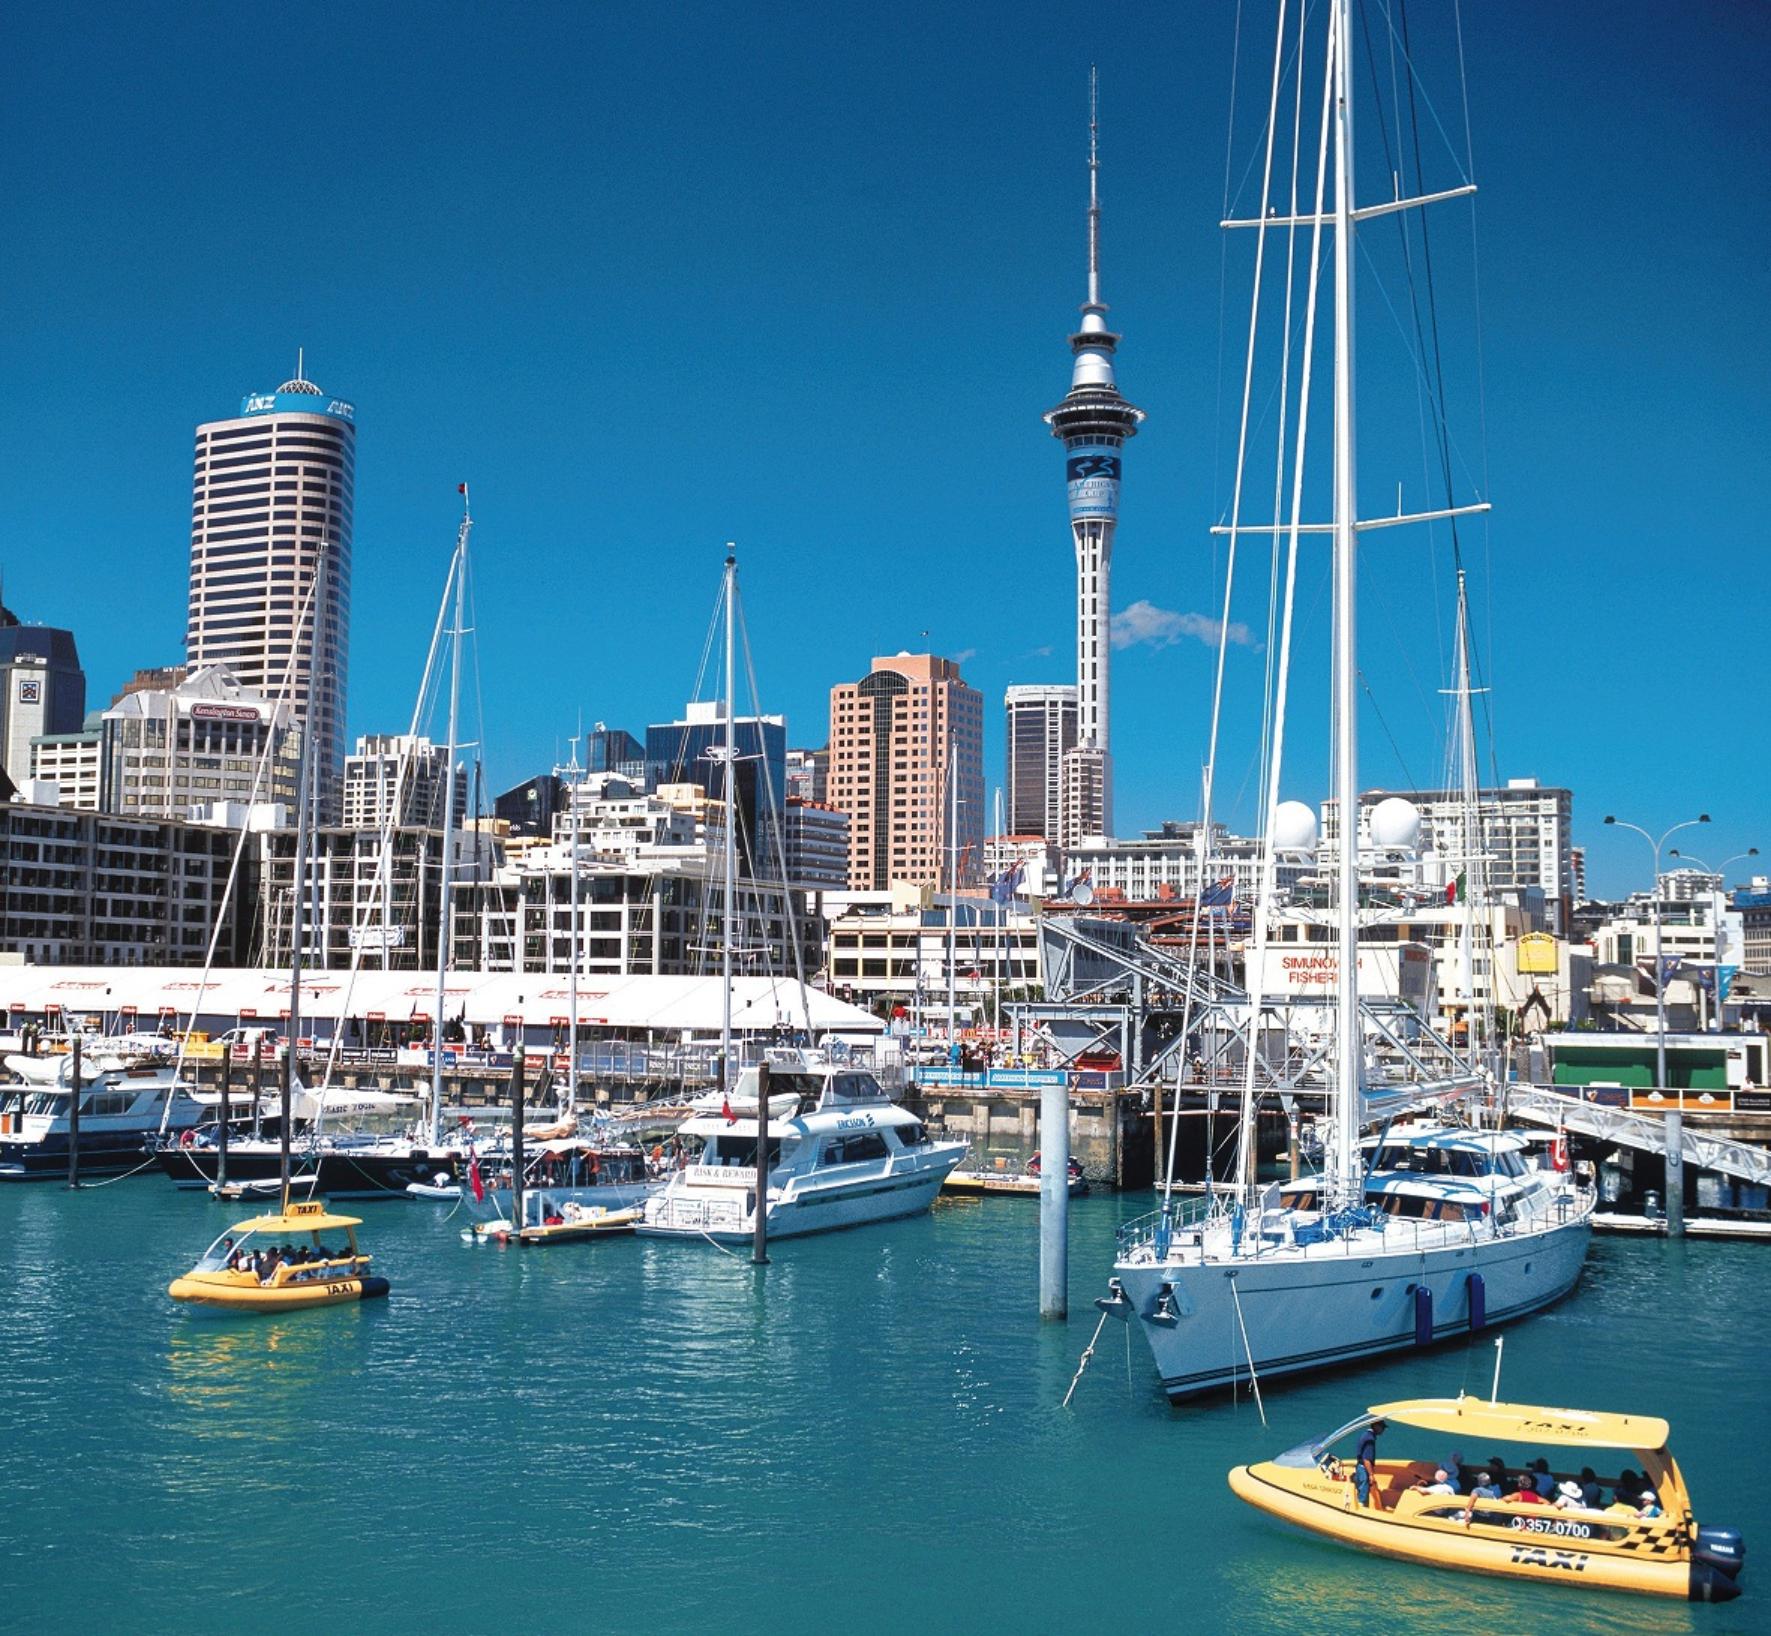 Guided tour of Auckland